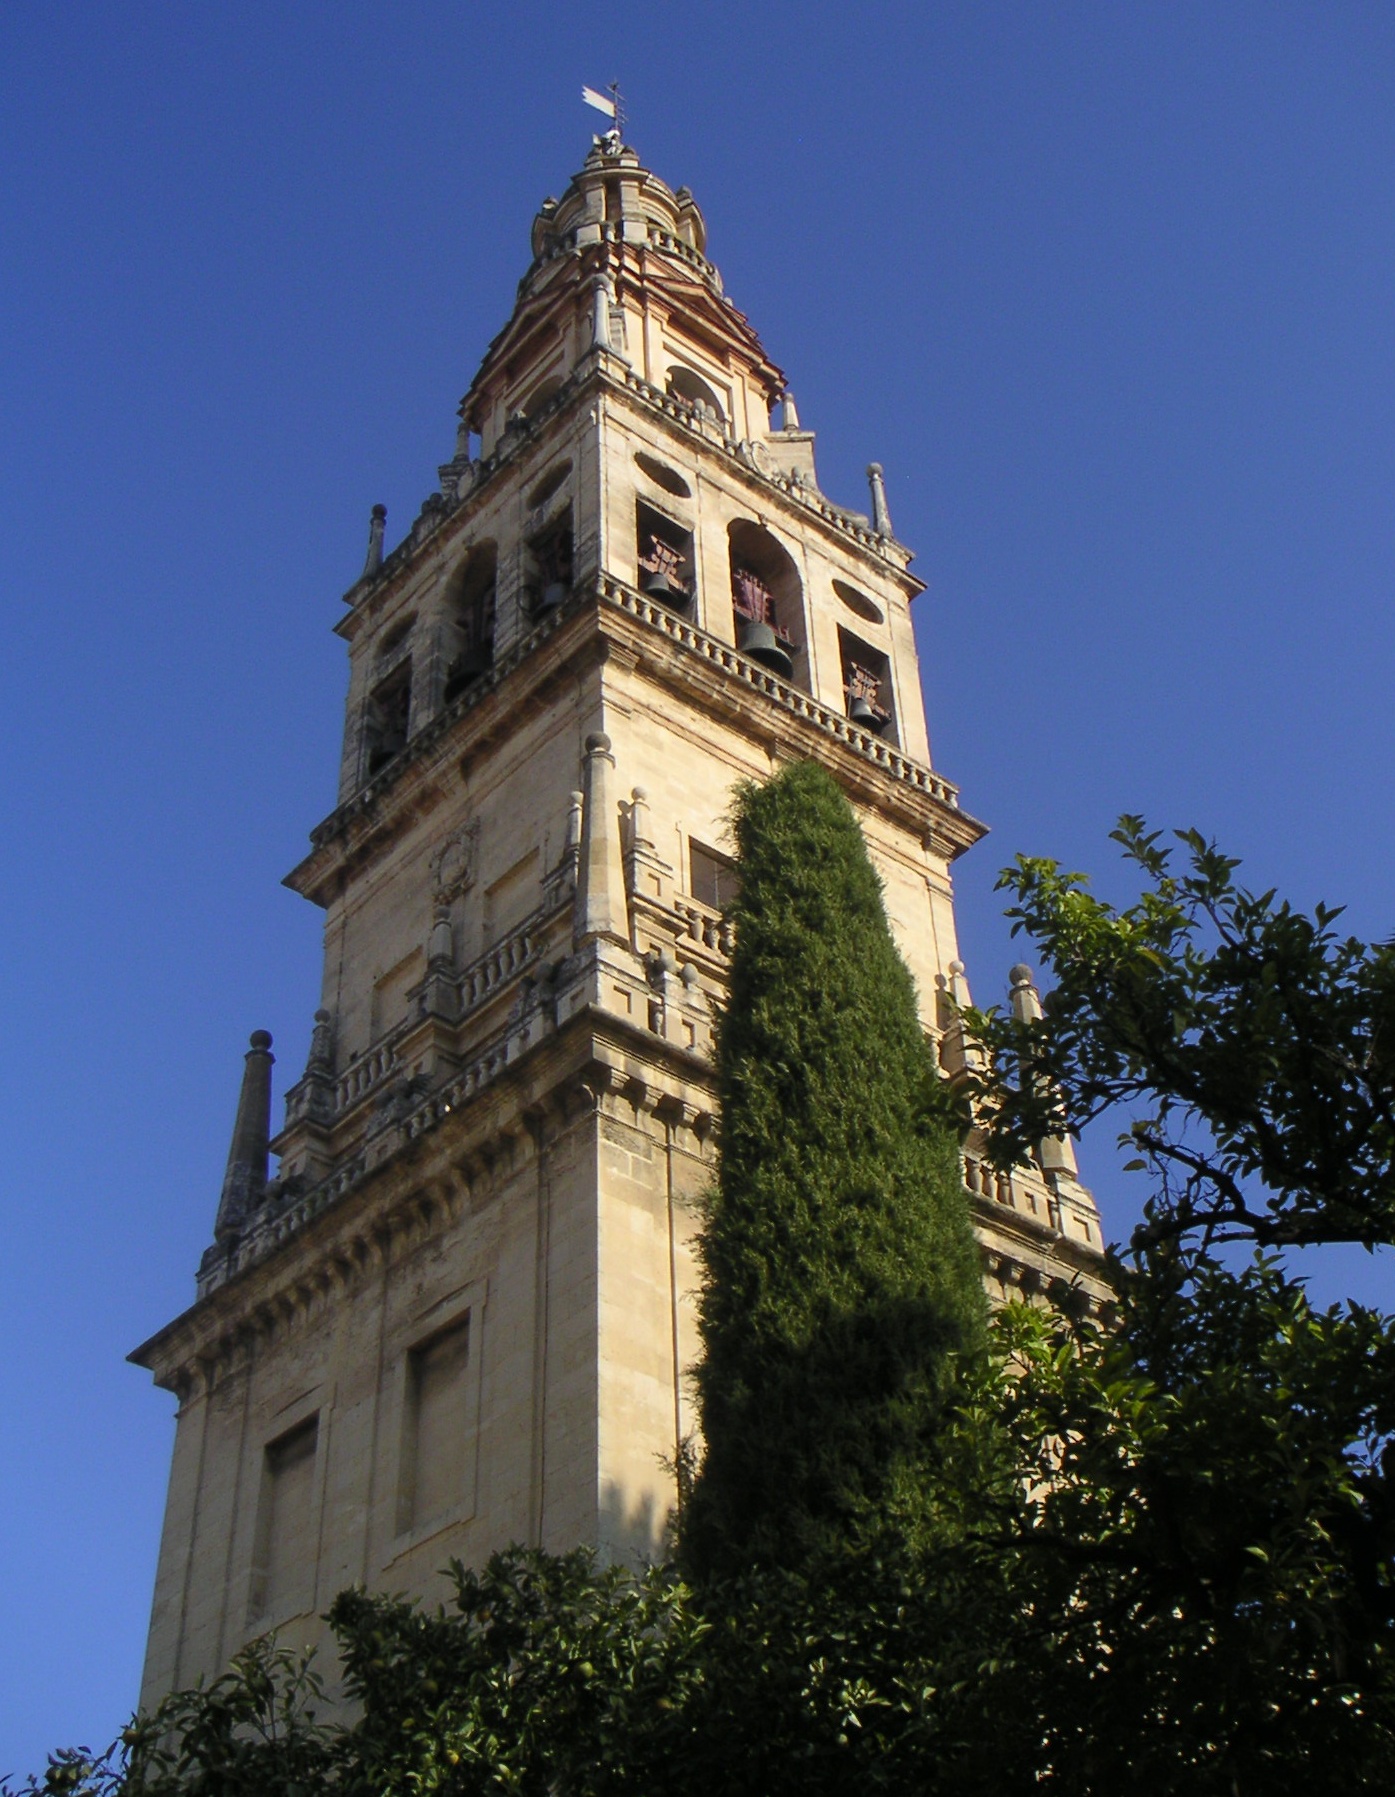 The Bell Tower or Torre de Alminar is 93m high and was built on the site of the original minaret